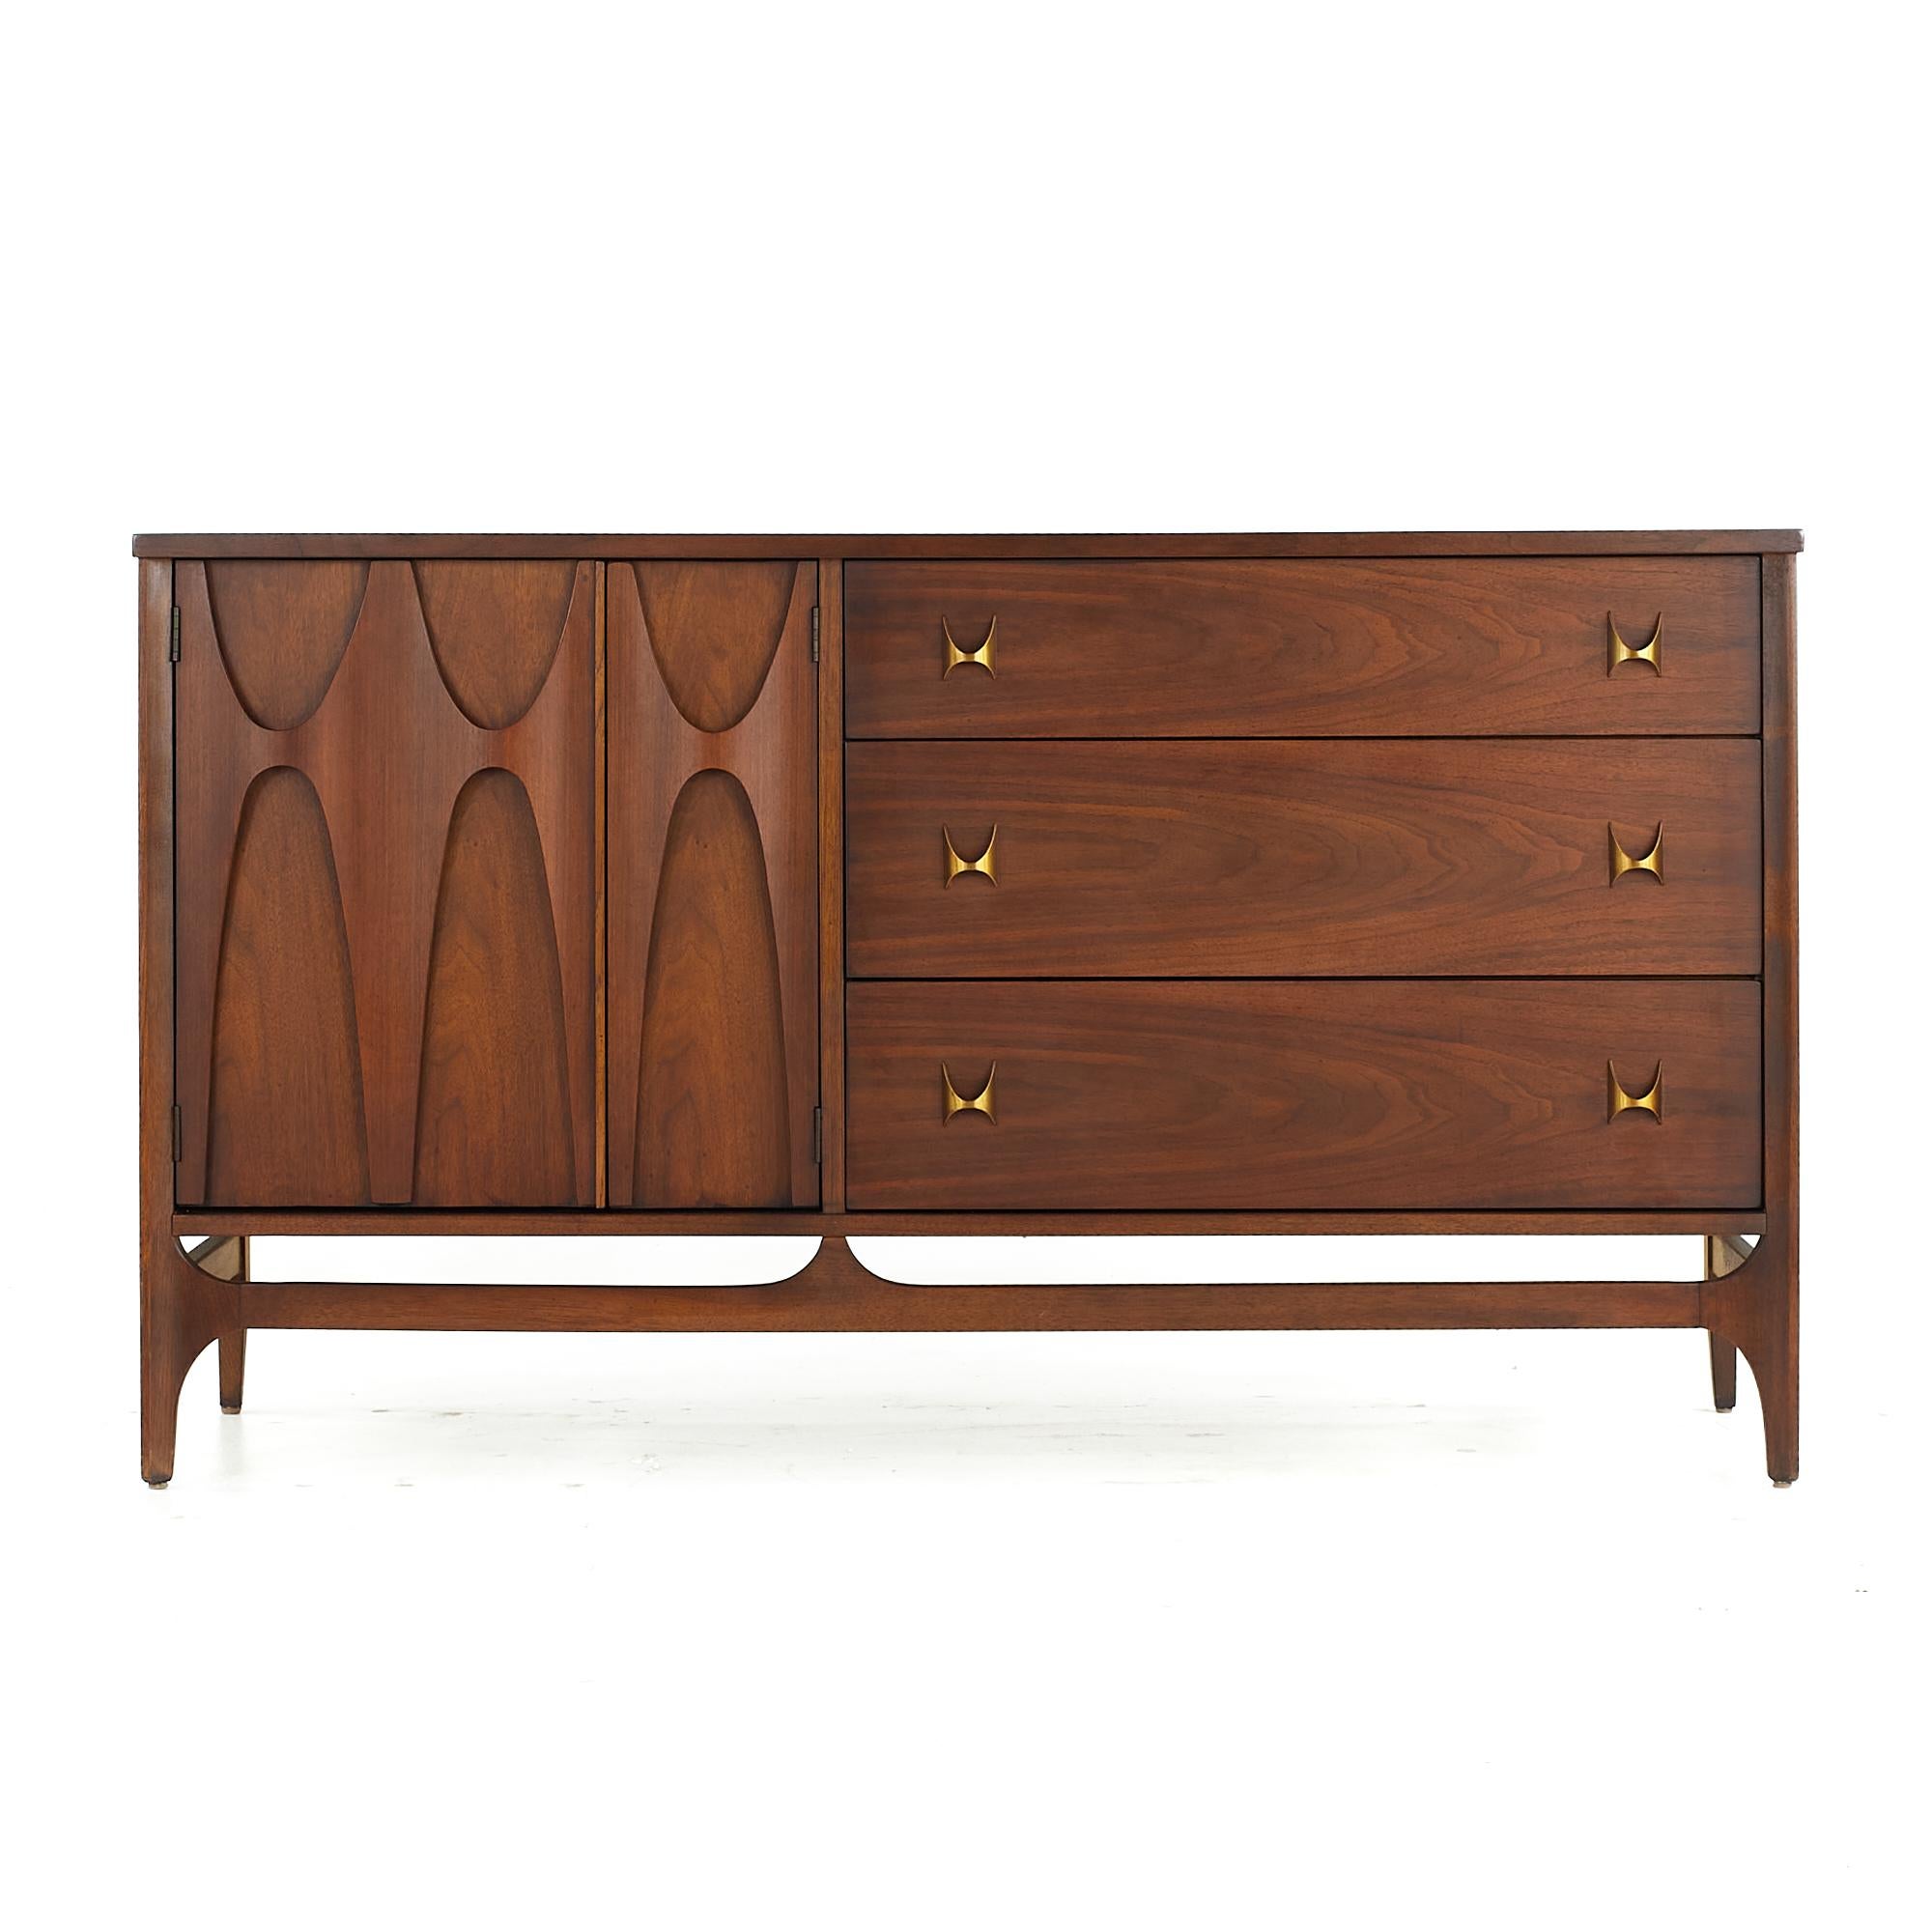 Broyhill Brasilia Mid Century Walnut and Brass Offset Buffet

This buffet measures: 54 wide x 19 deep x 31 inches high

All pieces of furniture can be had in what we call restored vintage condition. That means the piece is restored upon purchase so